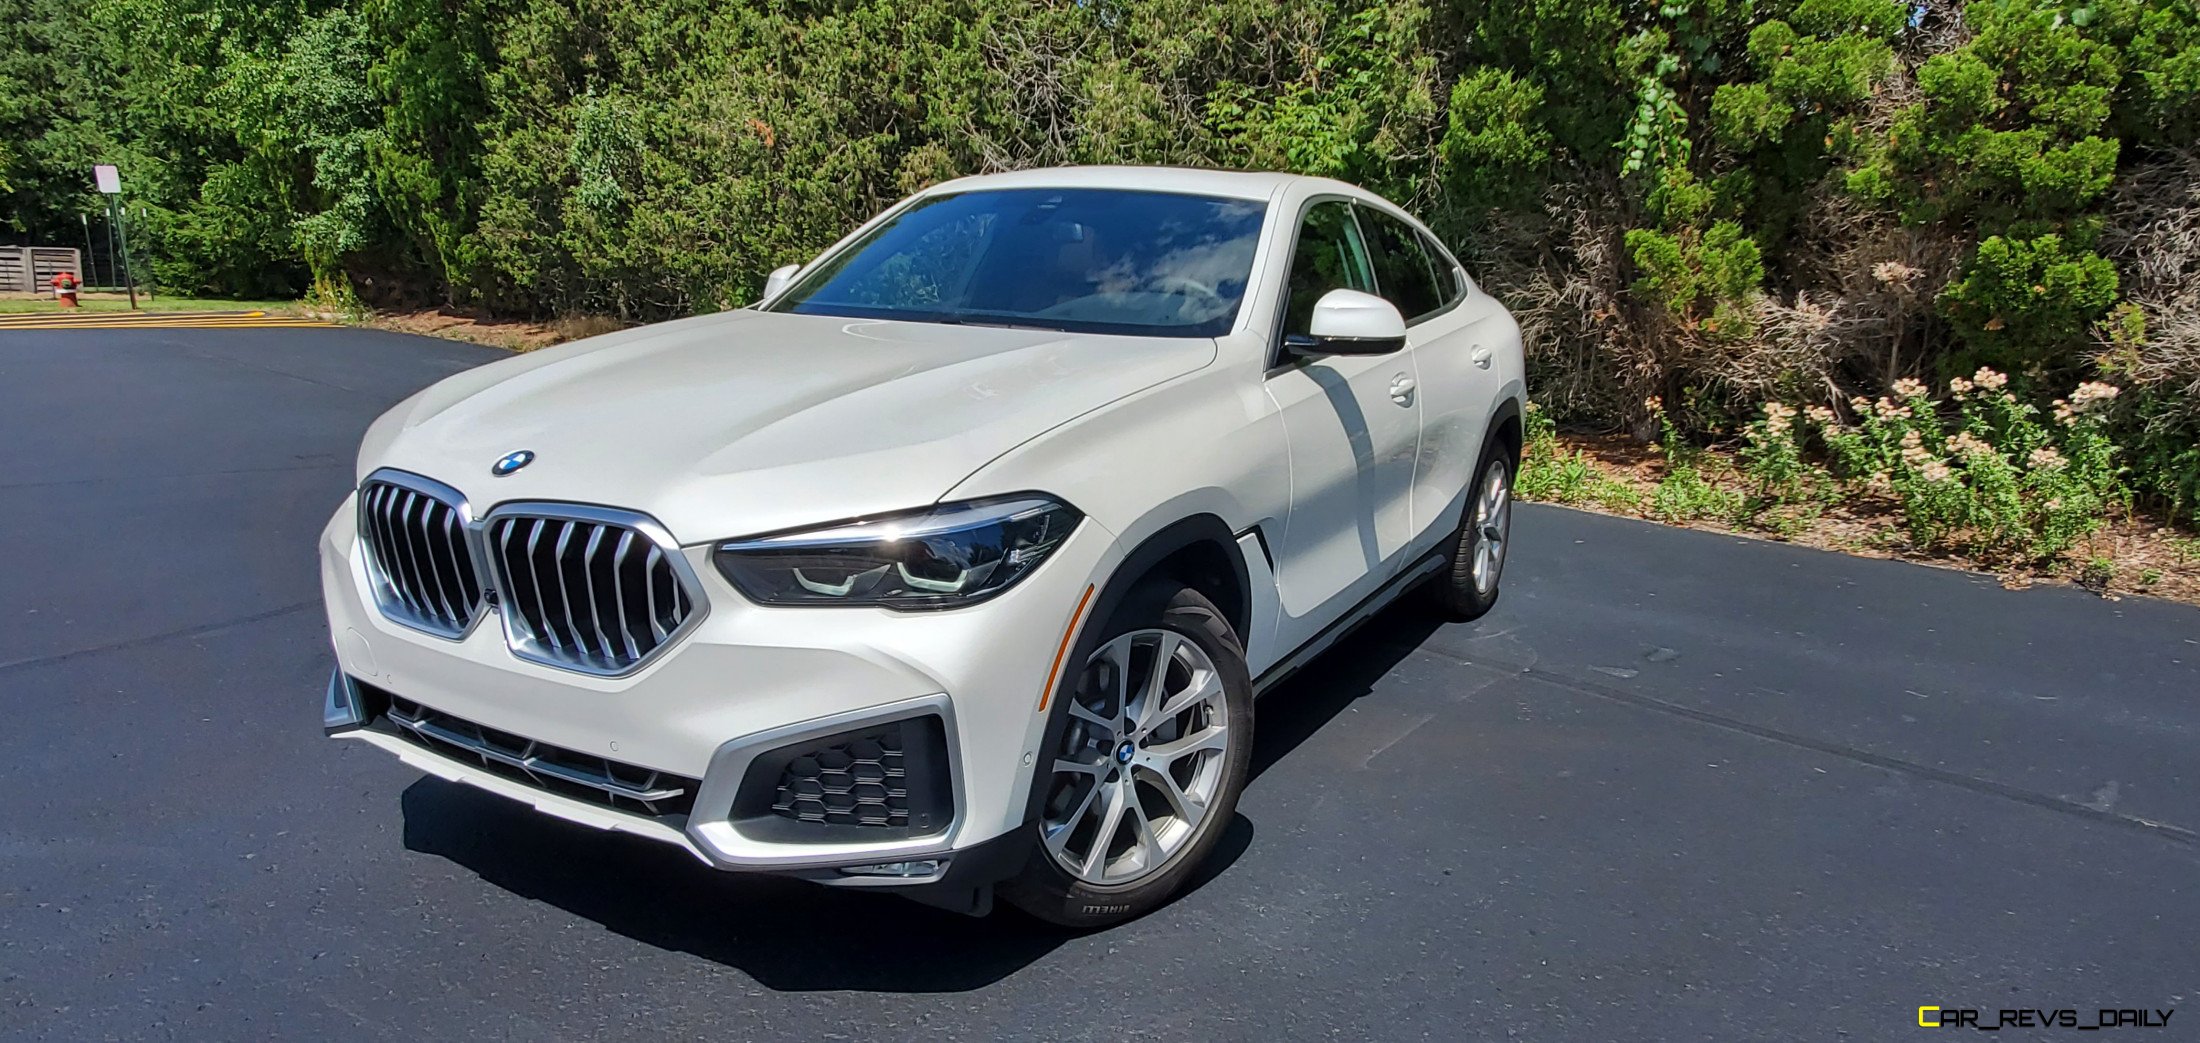 Is it possible to lose one's self for progress? We check out the 2020 BMW  X6 xDrive40i » LATEST NEWS »